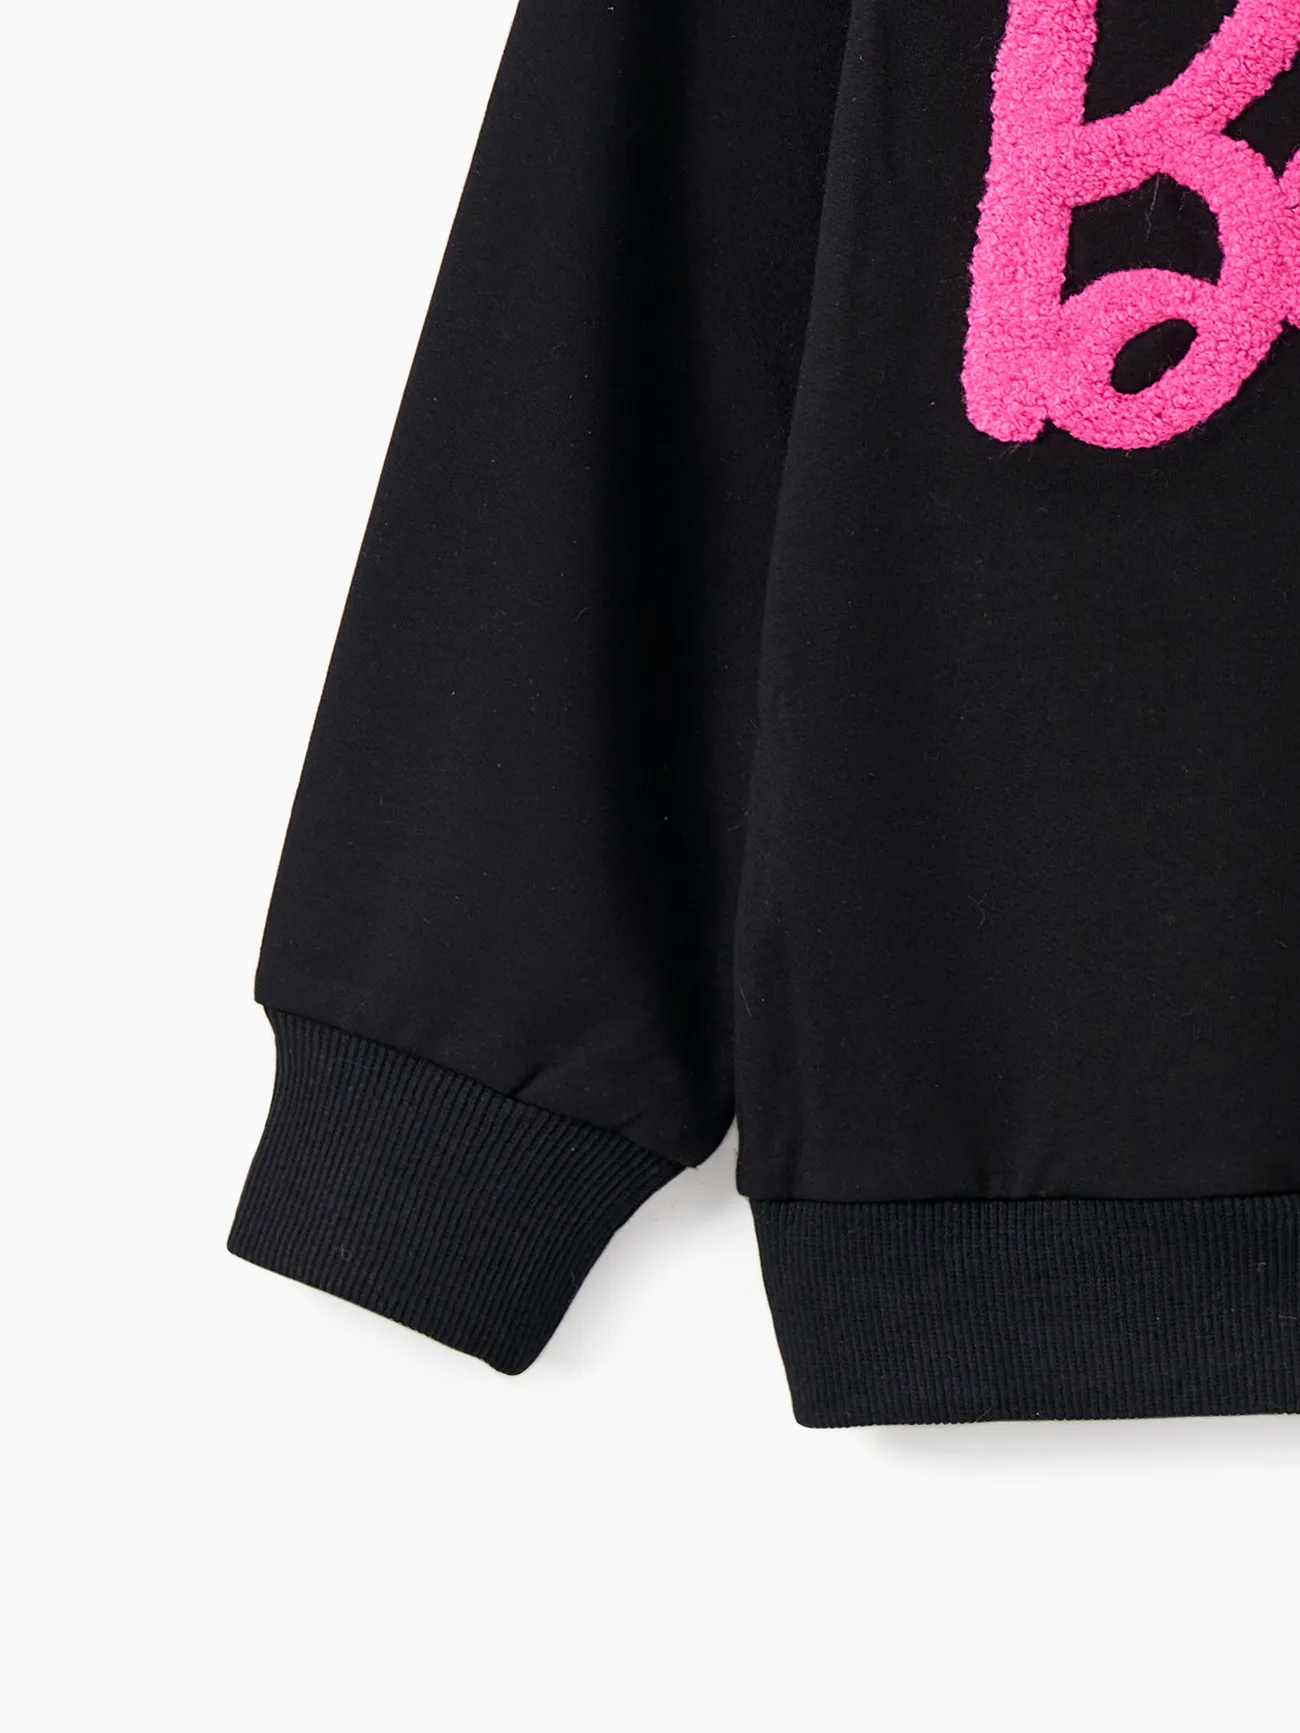 Barbie Mommy and Me Letter Embroidered Long-sleeve Cotton Sweatshirt Black big image 1